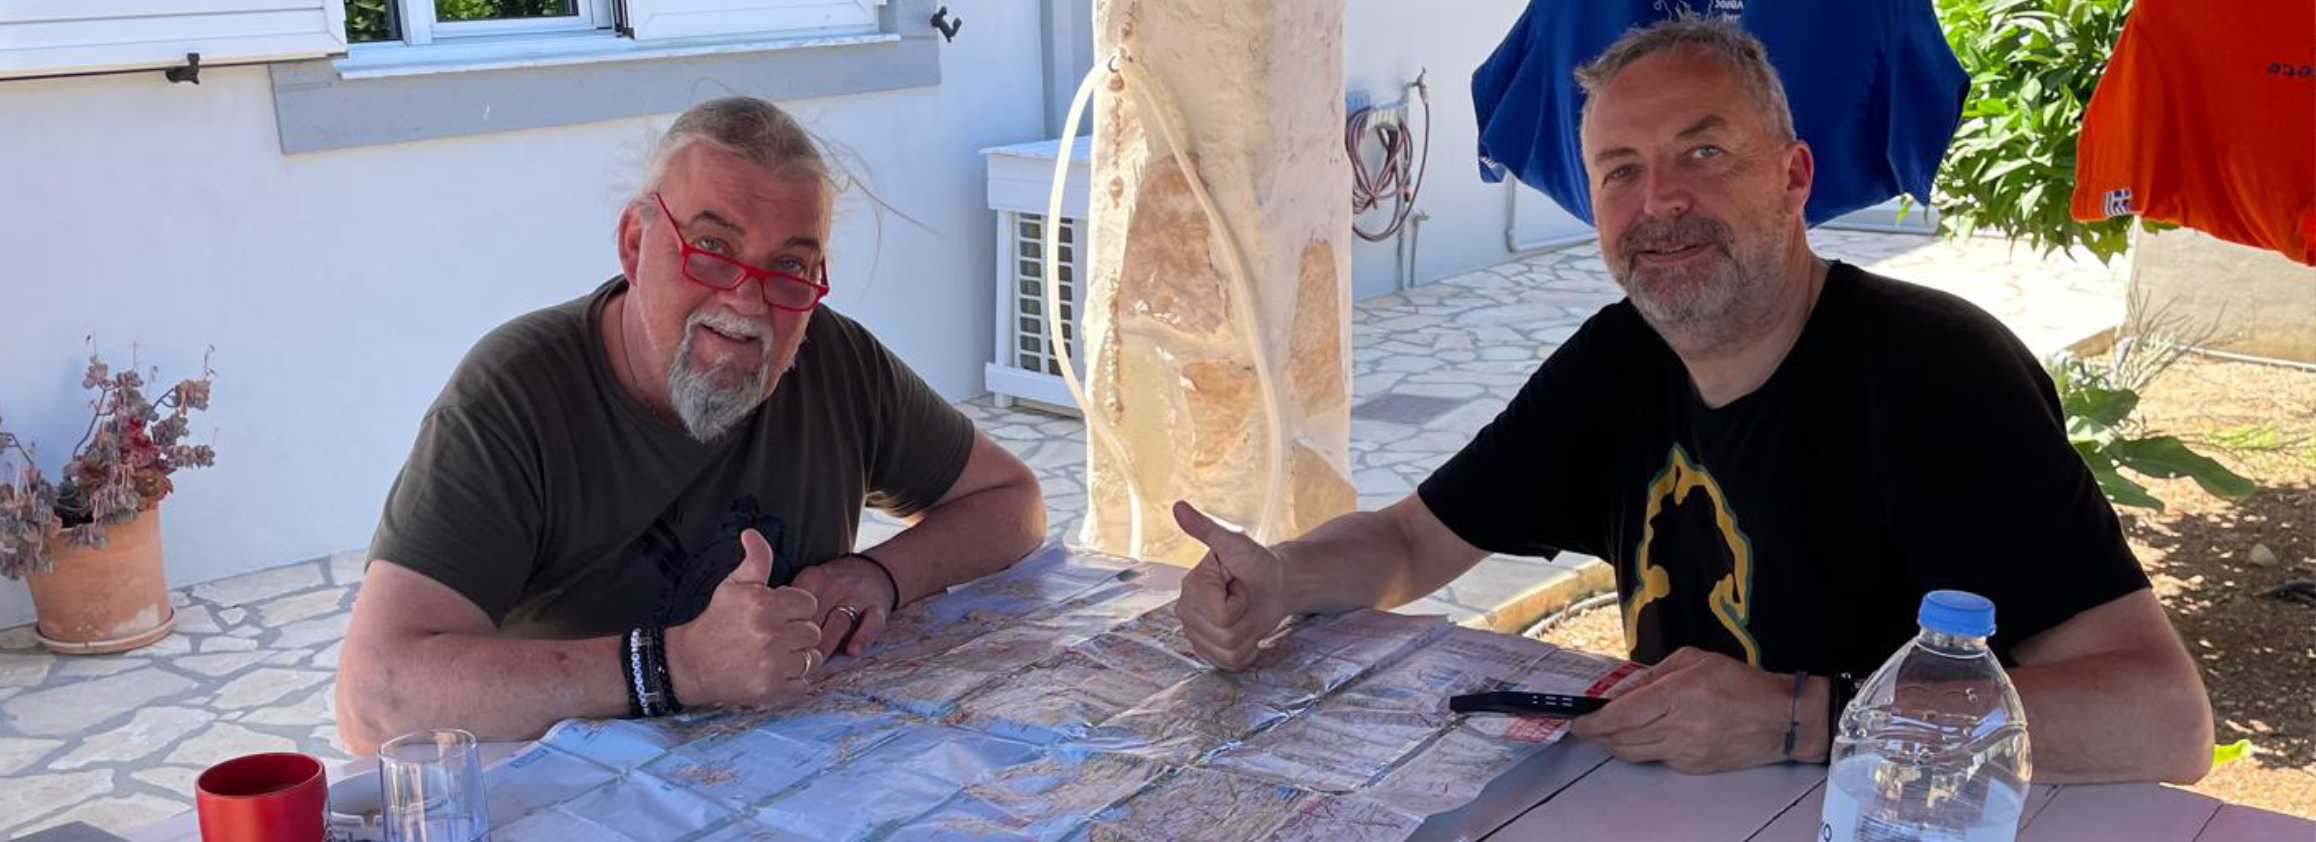 Hans-Peter Meffert and Crete-Mike at Crete, Greece, during the Rhein2Ganges Charity Motorcycle Tour